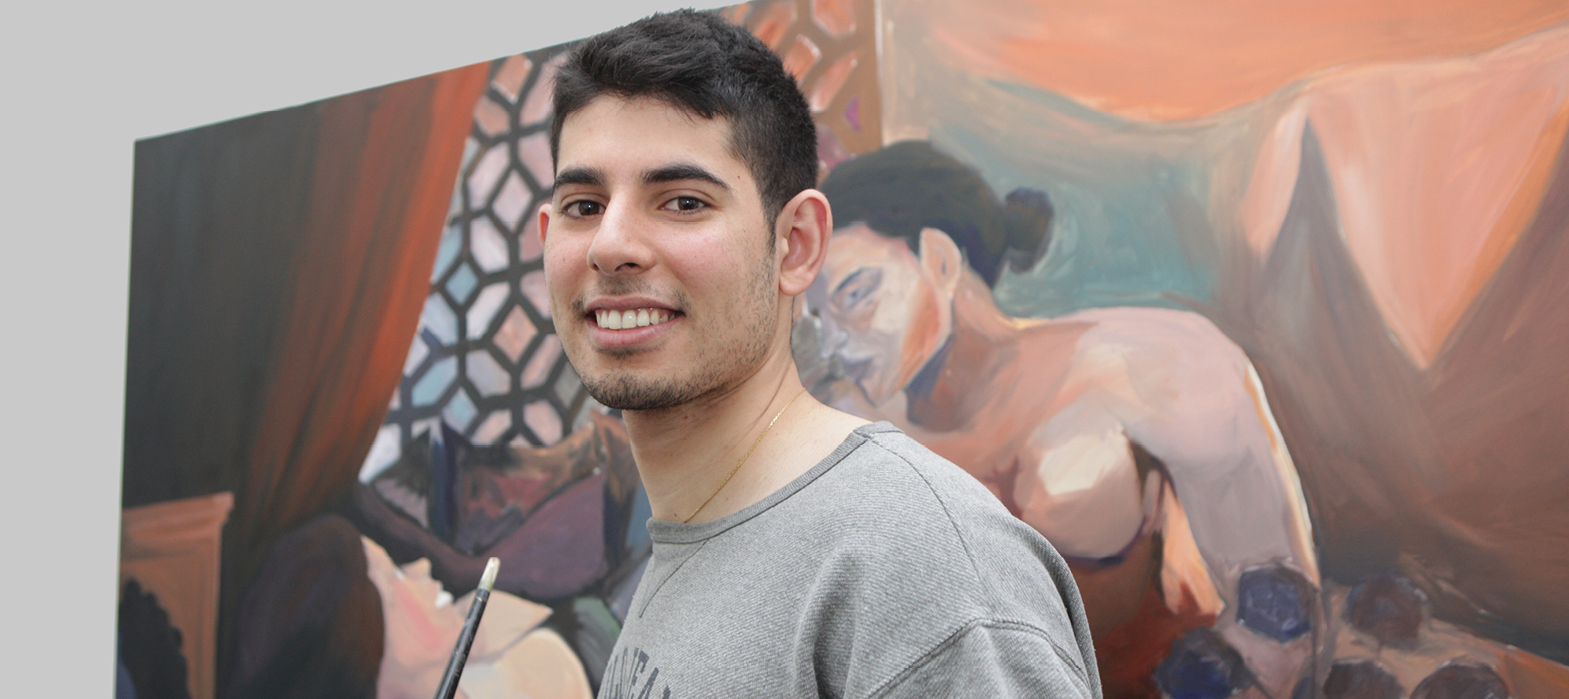 youth artist in front of his painting at the Youth Arcade Studio